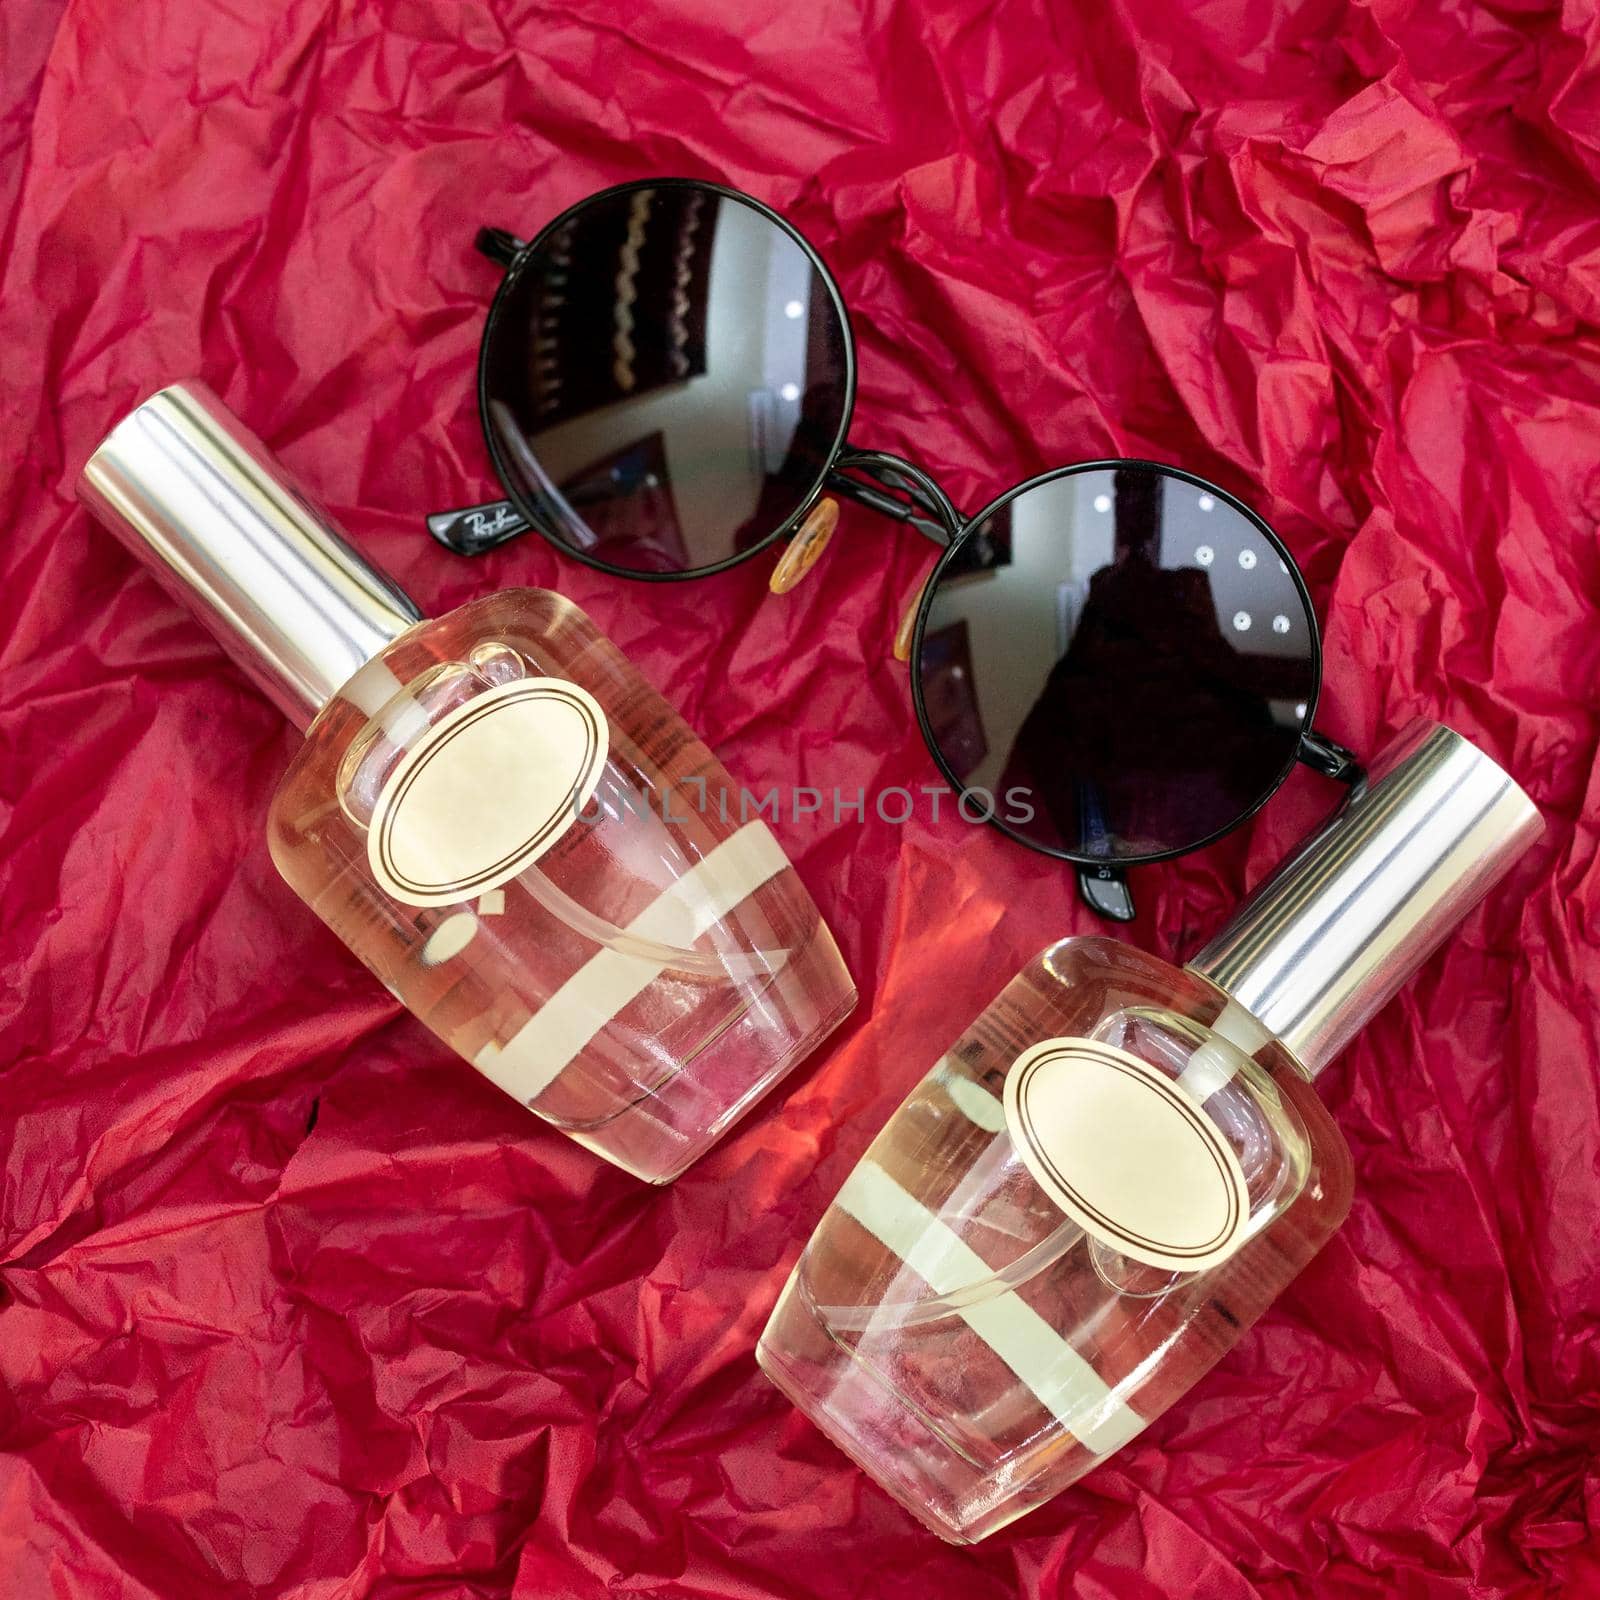 Perfume flacon with sunglass on the red cellophane by ferhad